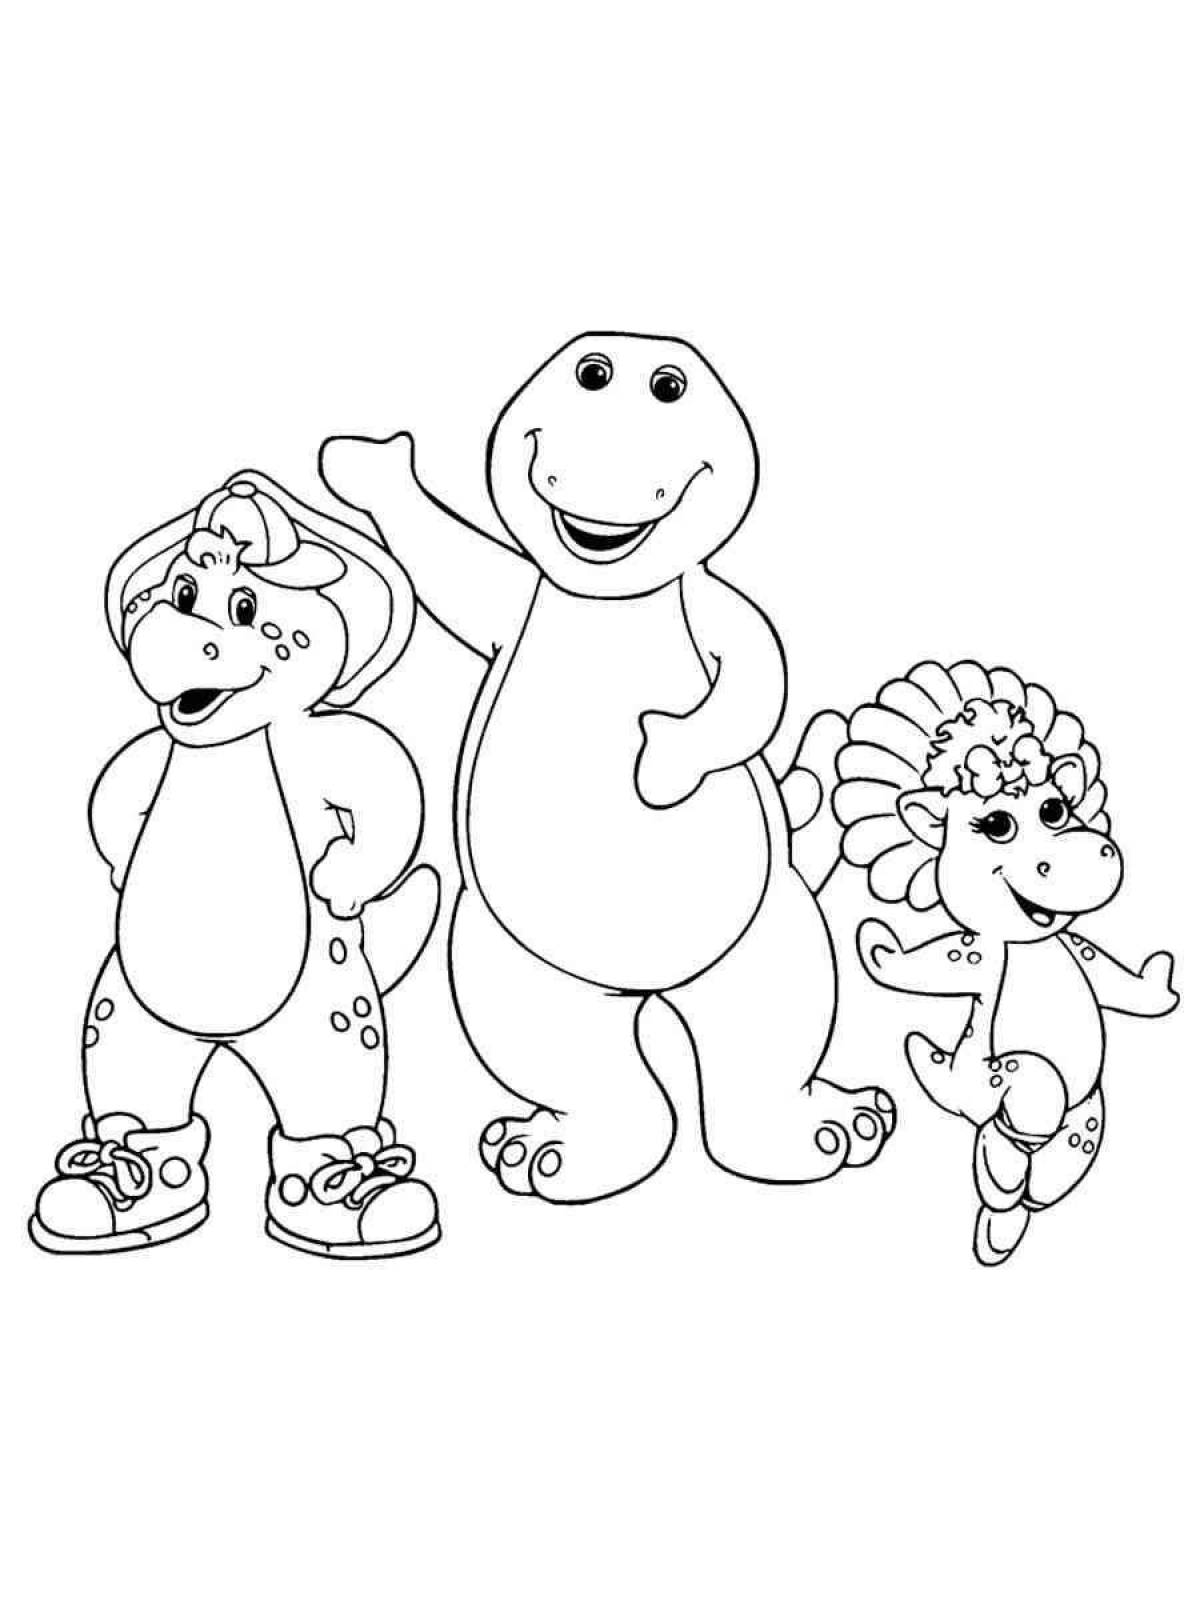 Barney's fluffy bear coloring page